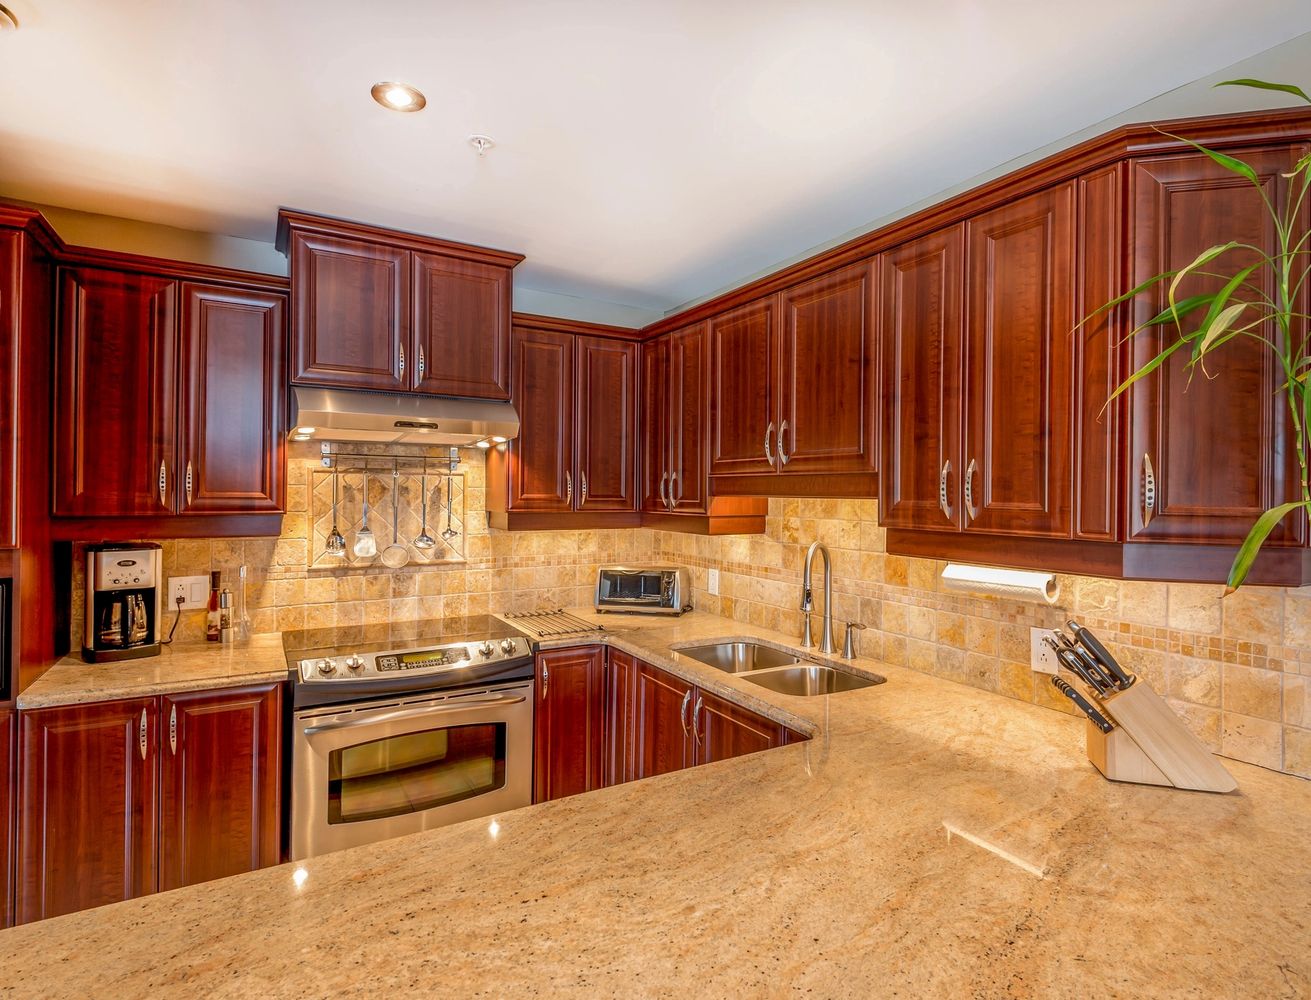 High end kitchen. Wrap around marble countertop, mahogany (to ceiling) cupboards, induction stove.